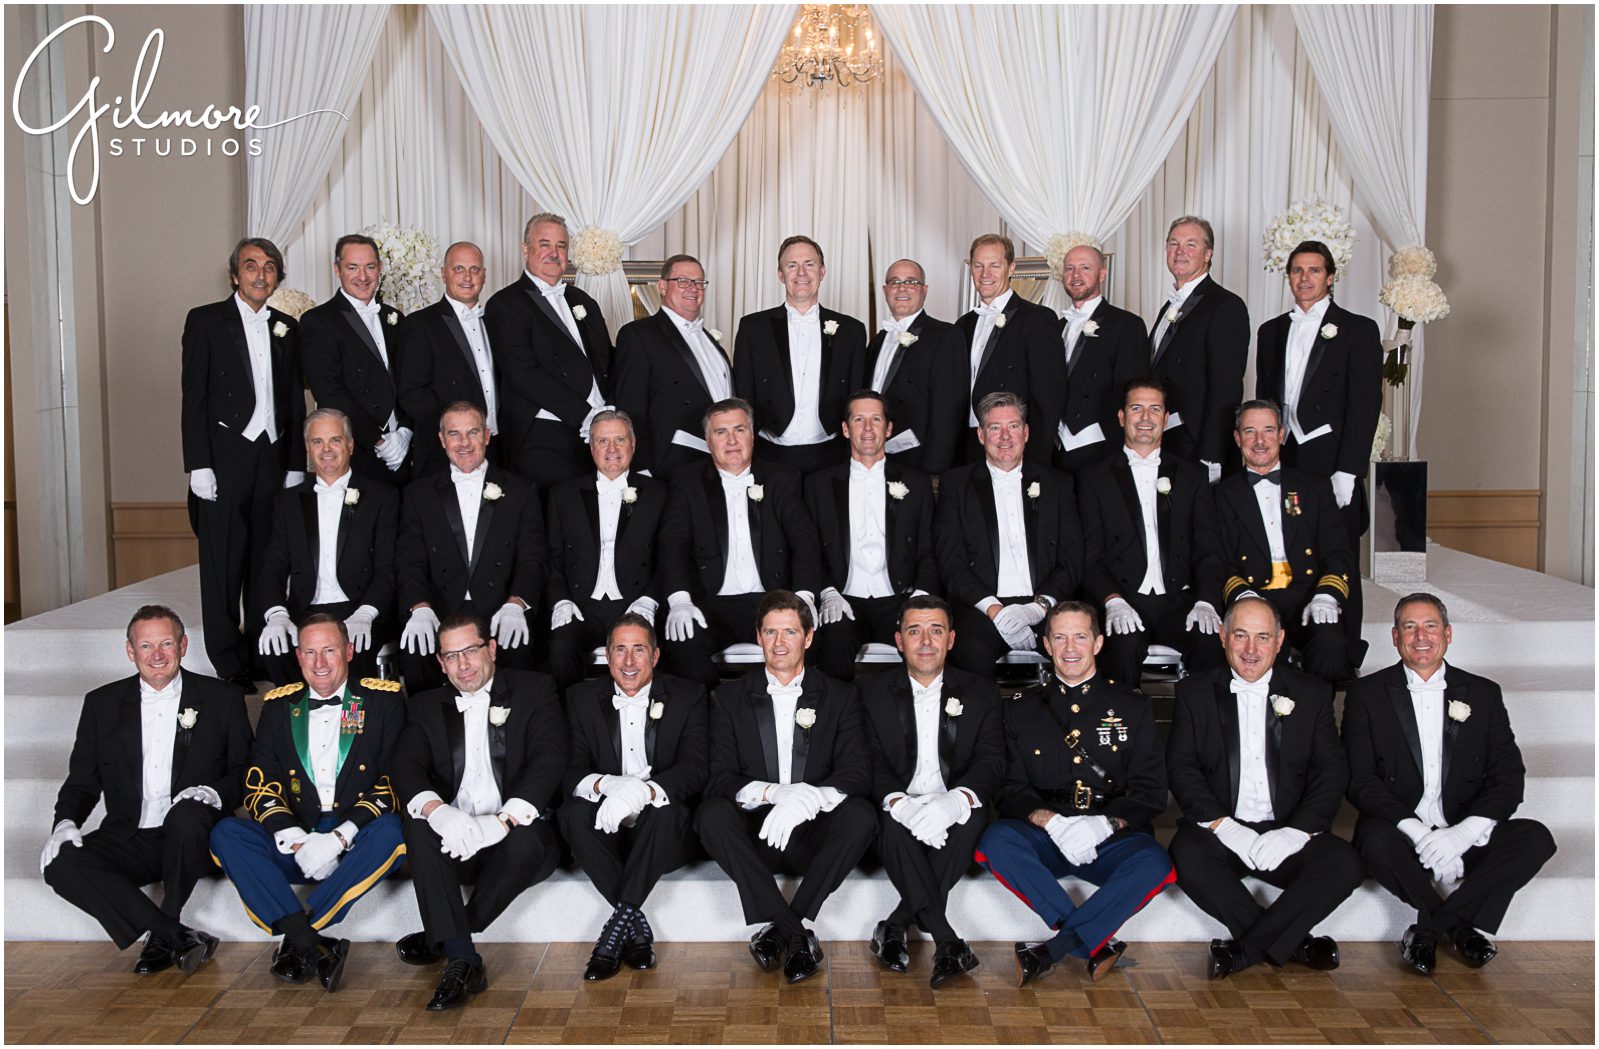 Debutante ball photographer, group photo of the dads in their formal black tie attire